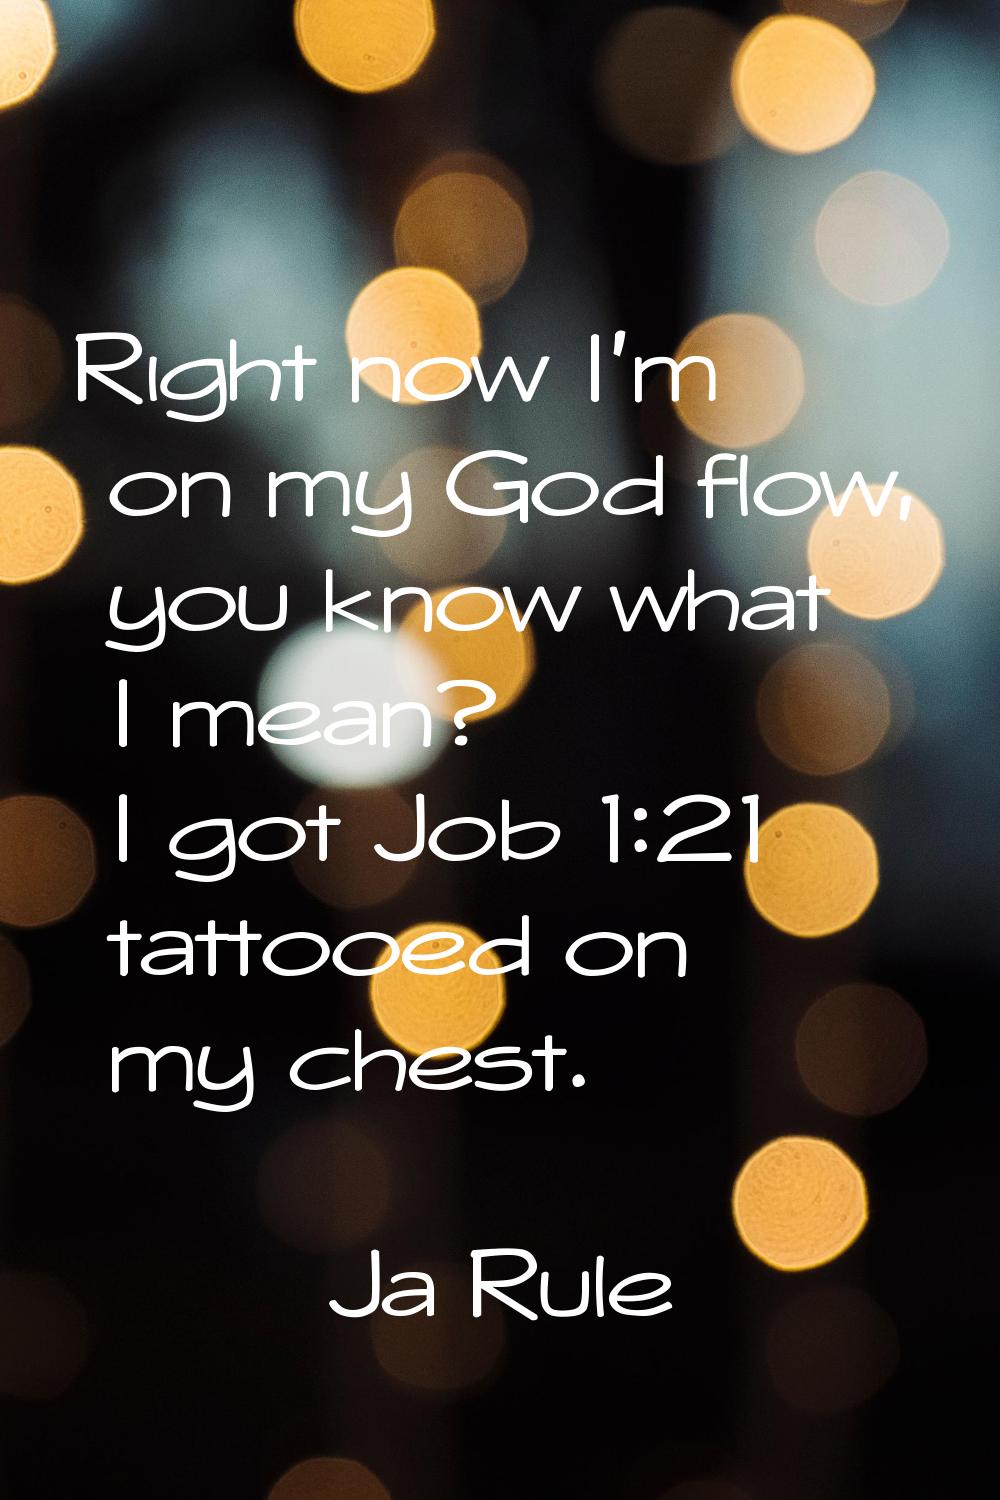 Right now I'm on my God flow, you know what I mean? I got Job 1:21 tattooed on my chest.